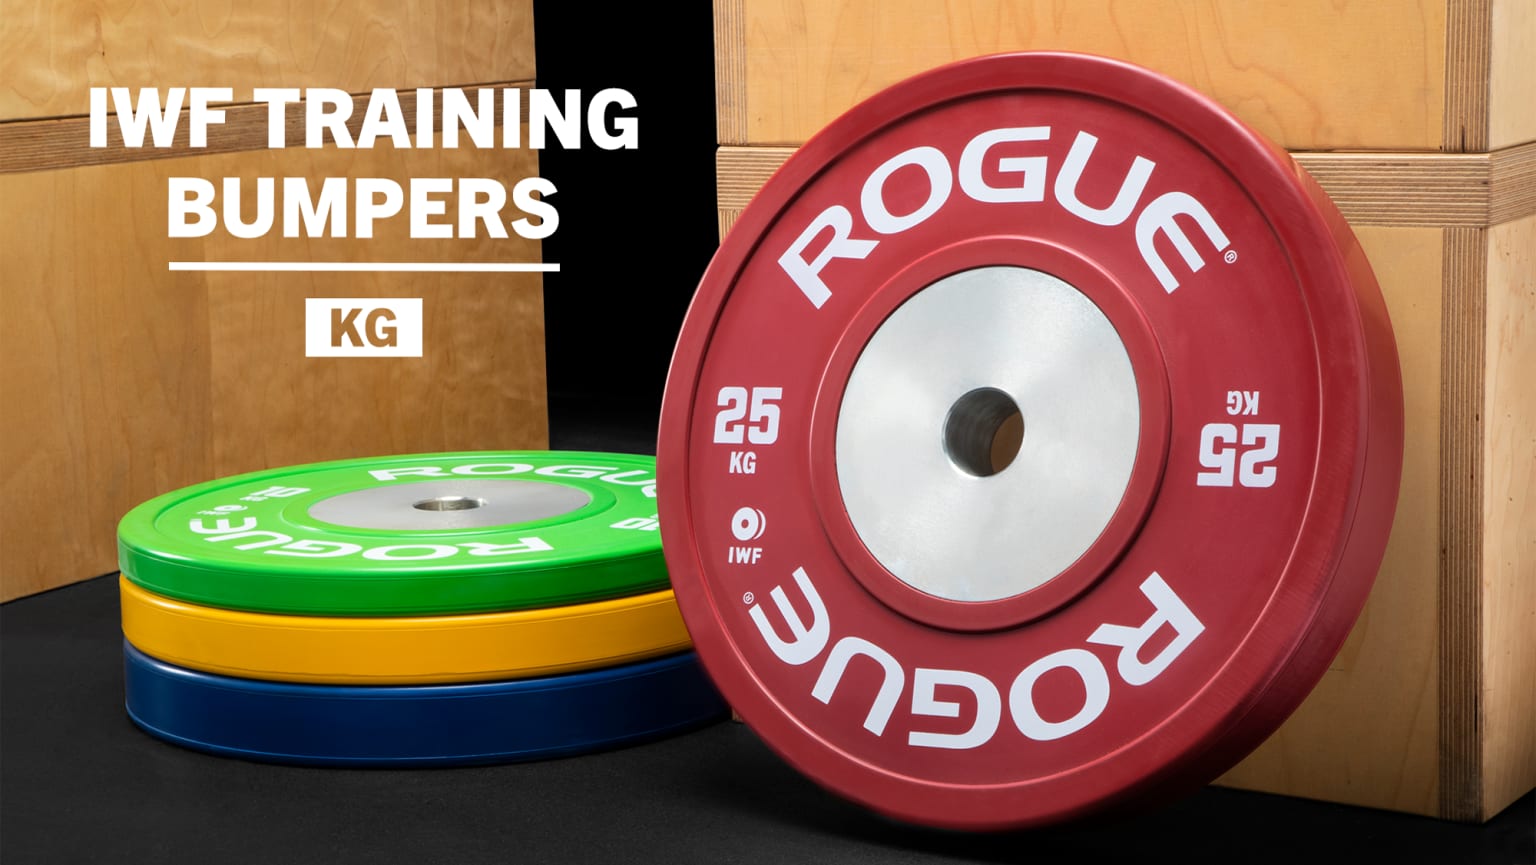 Rogue Color KG Training 2.0 Plates (IWF) | Rogue Fitness APO